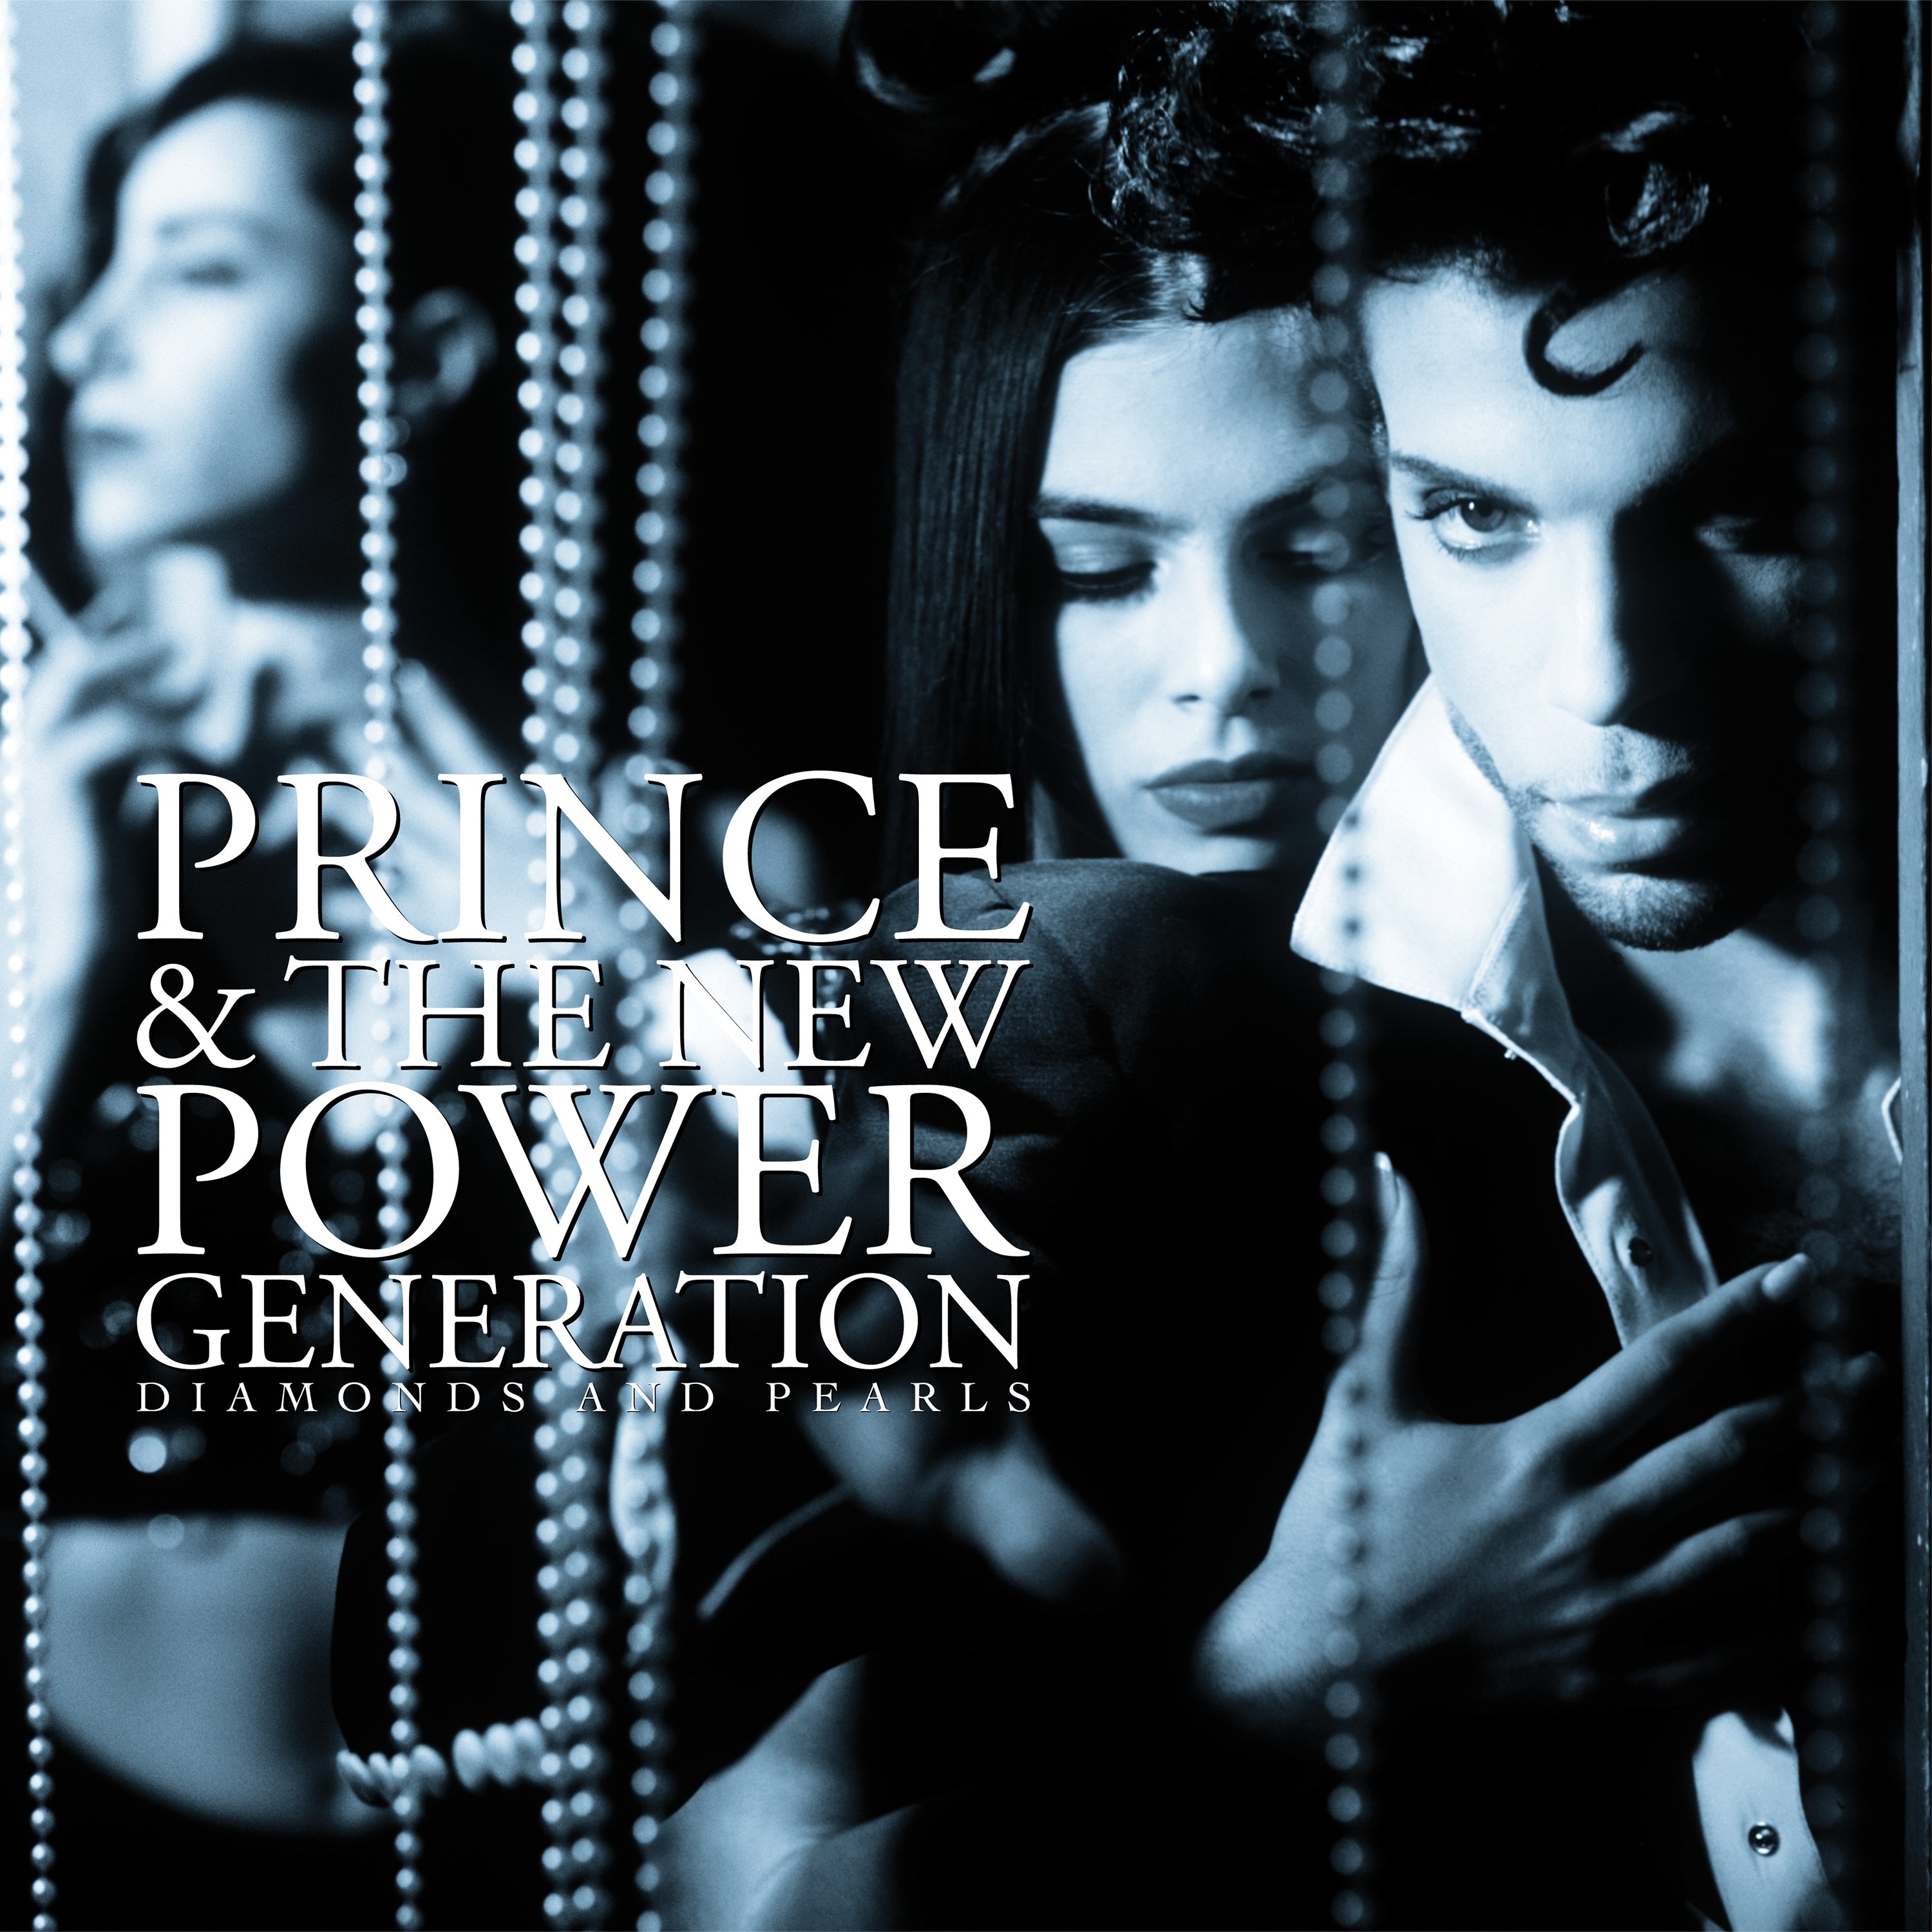 Prince & The New Power Generation | Diamonds and Pearls Super Deluxe Edition | CD